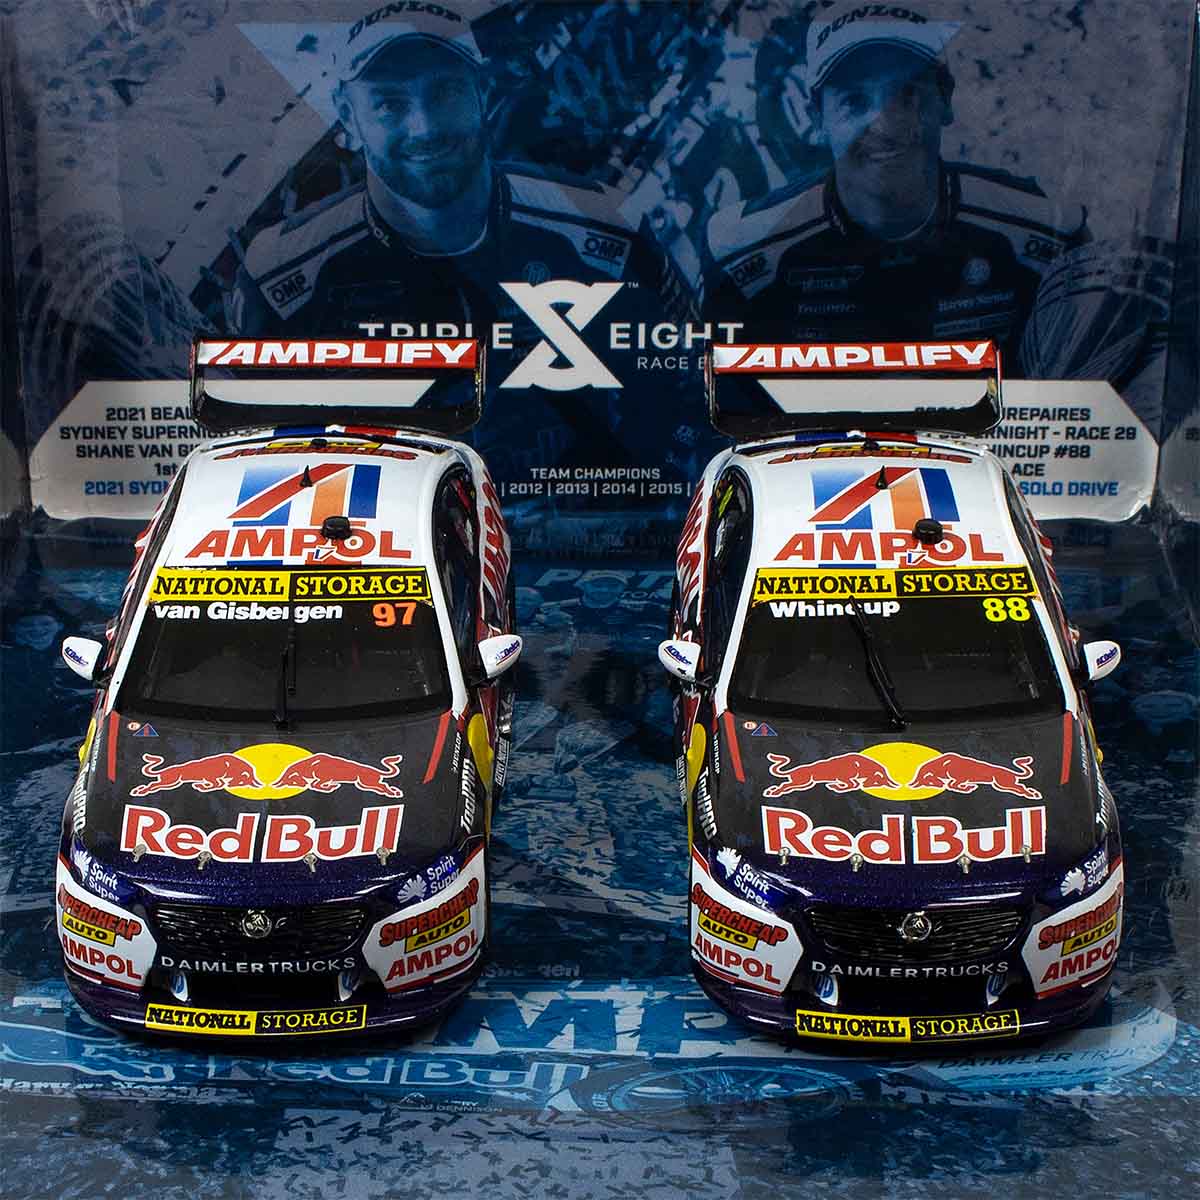 HOLDEN ZB COMMODORE - RED BULL AMPOL RACING - VAN GISBERGEN/WHINCUP - 2021 TEAMS CHAMPIONSHIP WINNER TWIN SET - 1:43 Scale Diecast Model Car